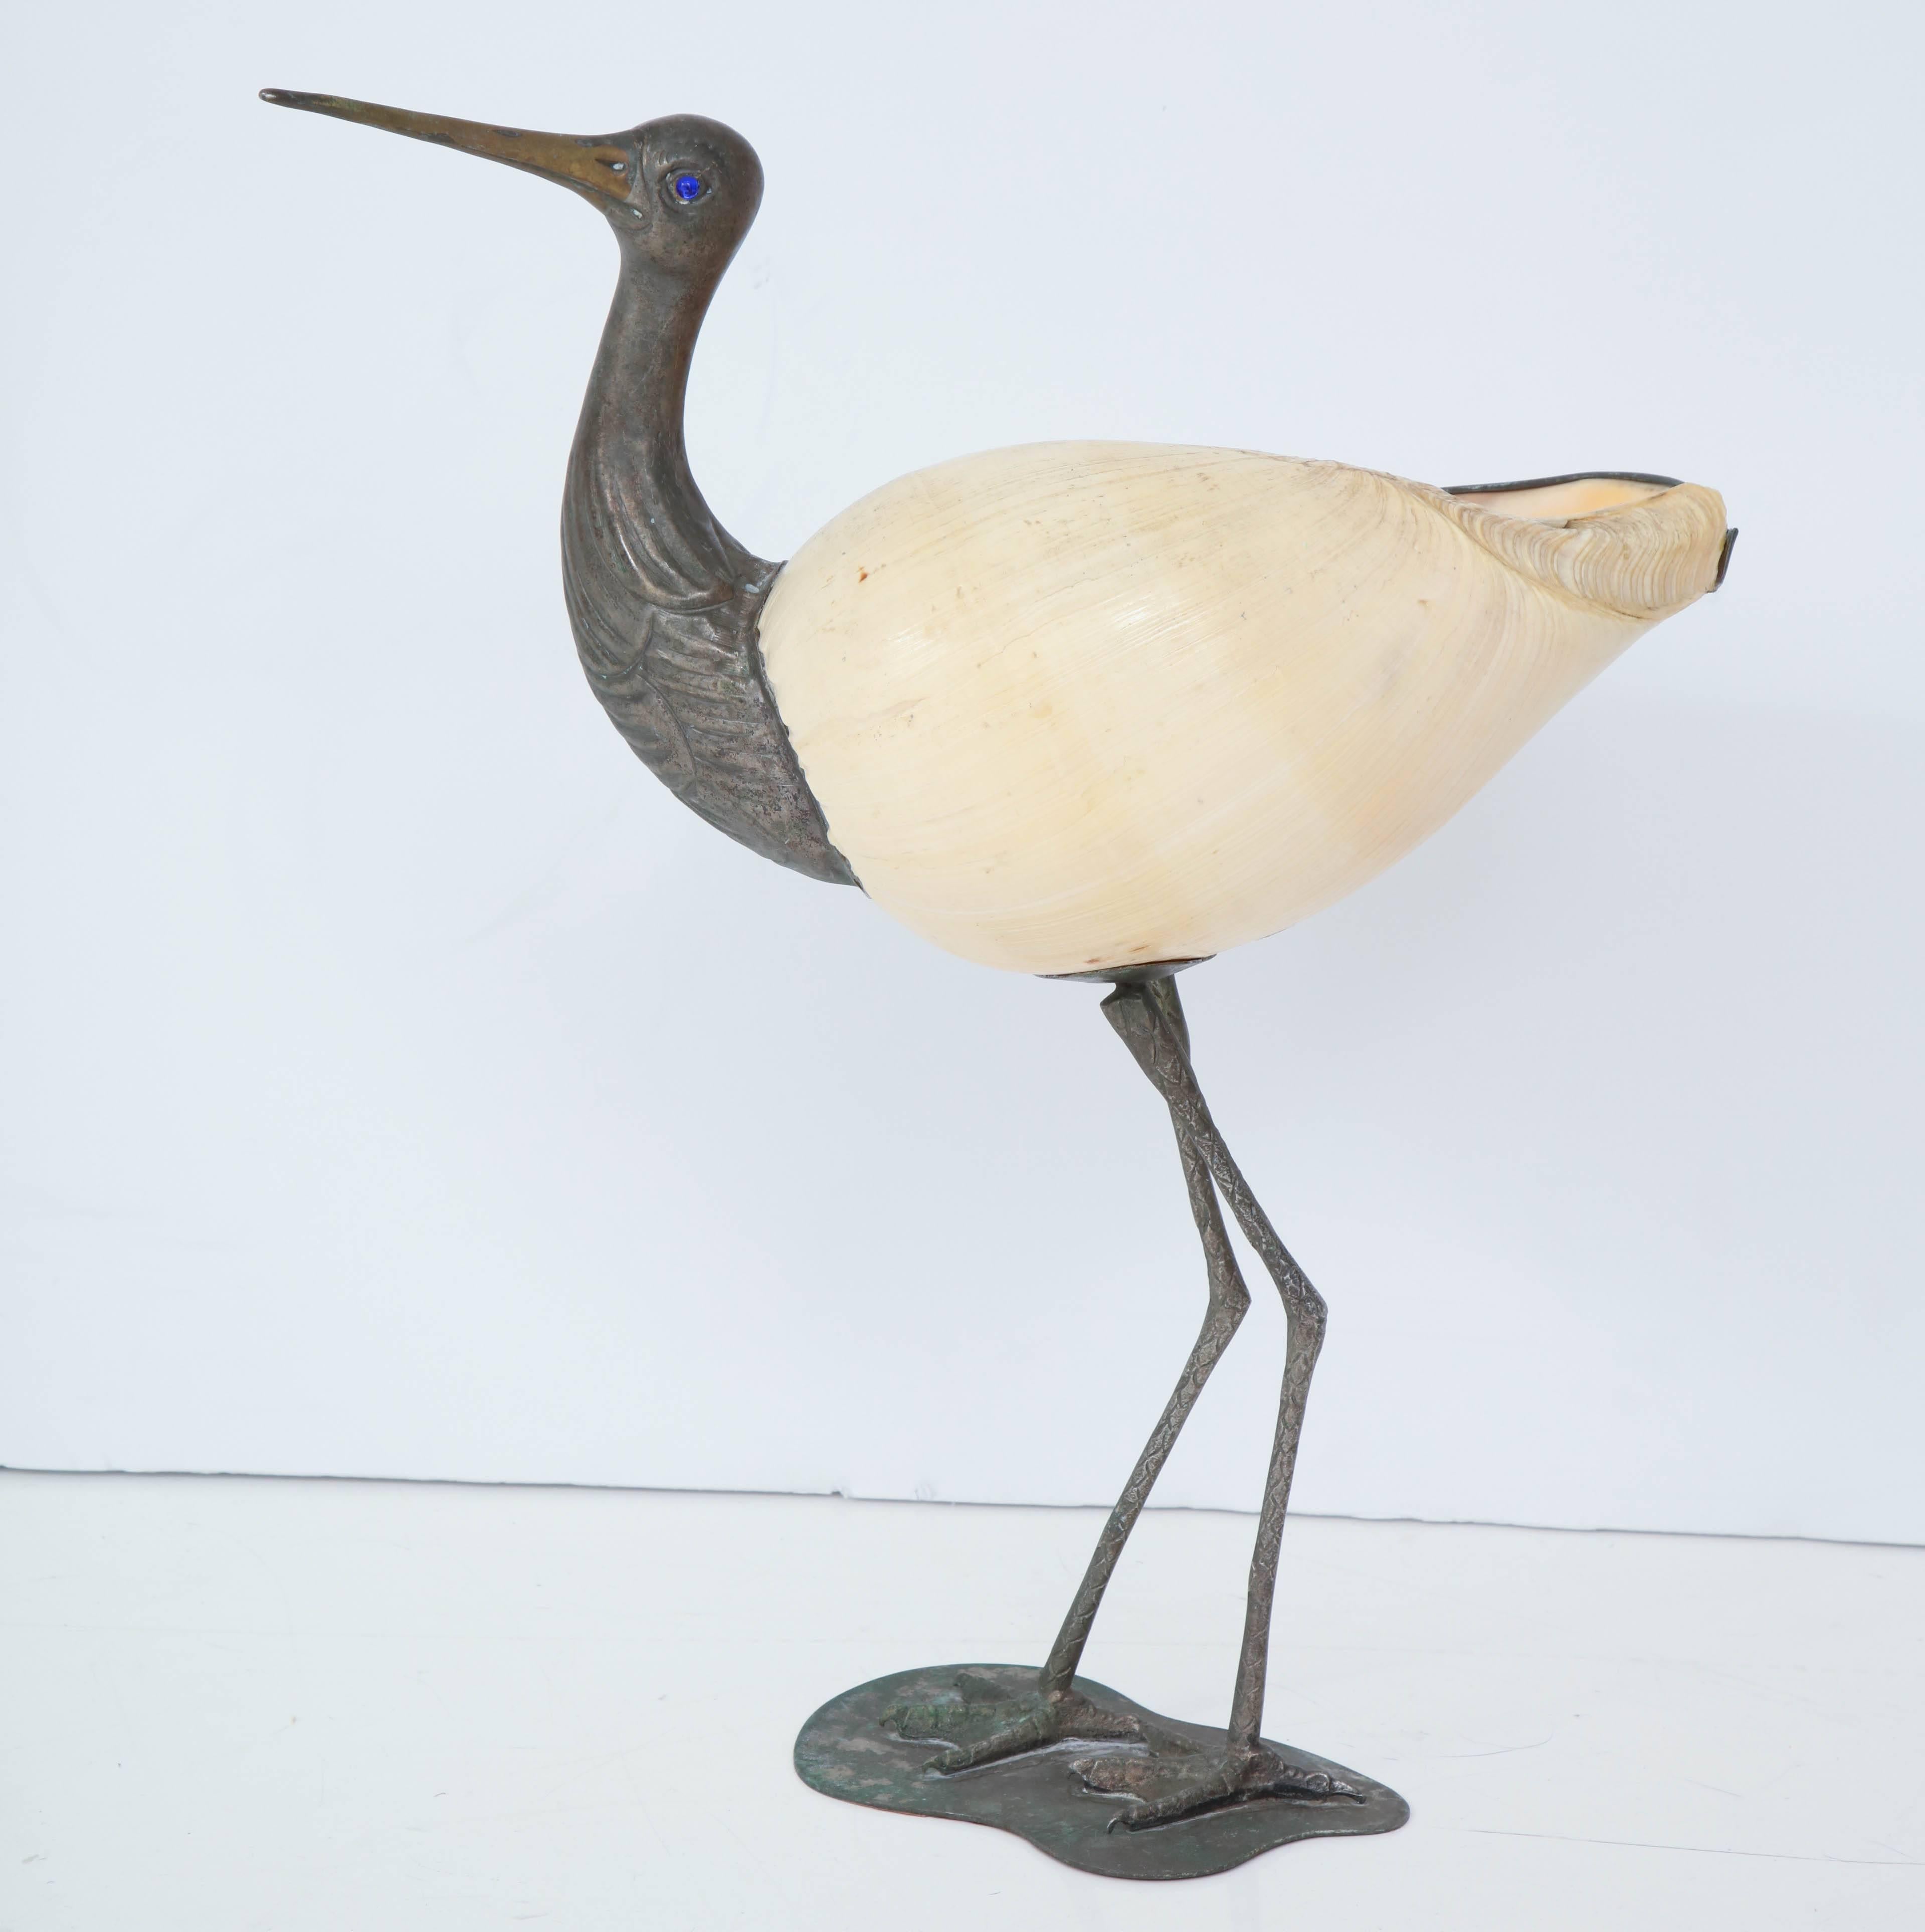 Natural seashell transformed into a bird by Foresto Binazzi.